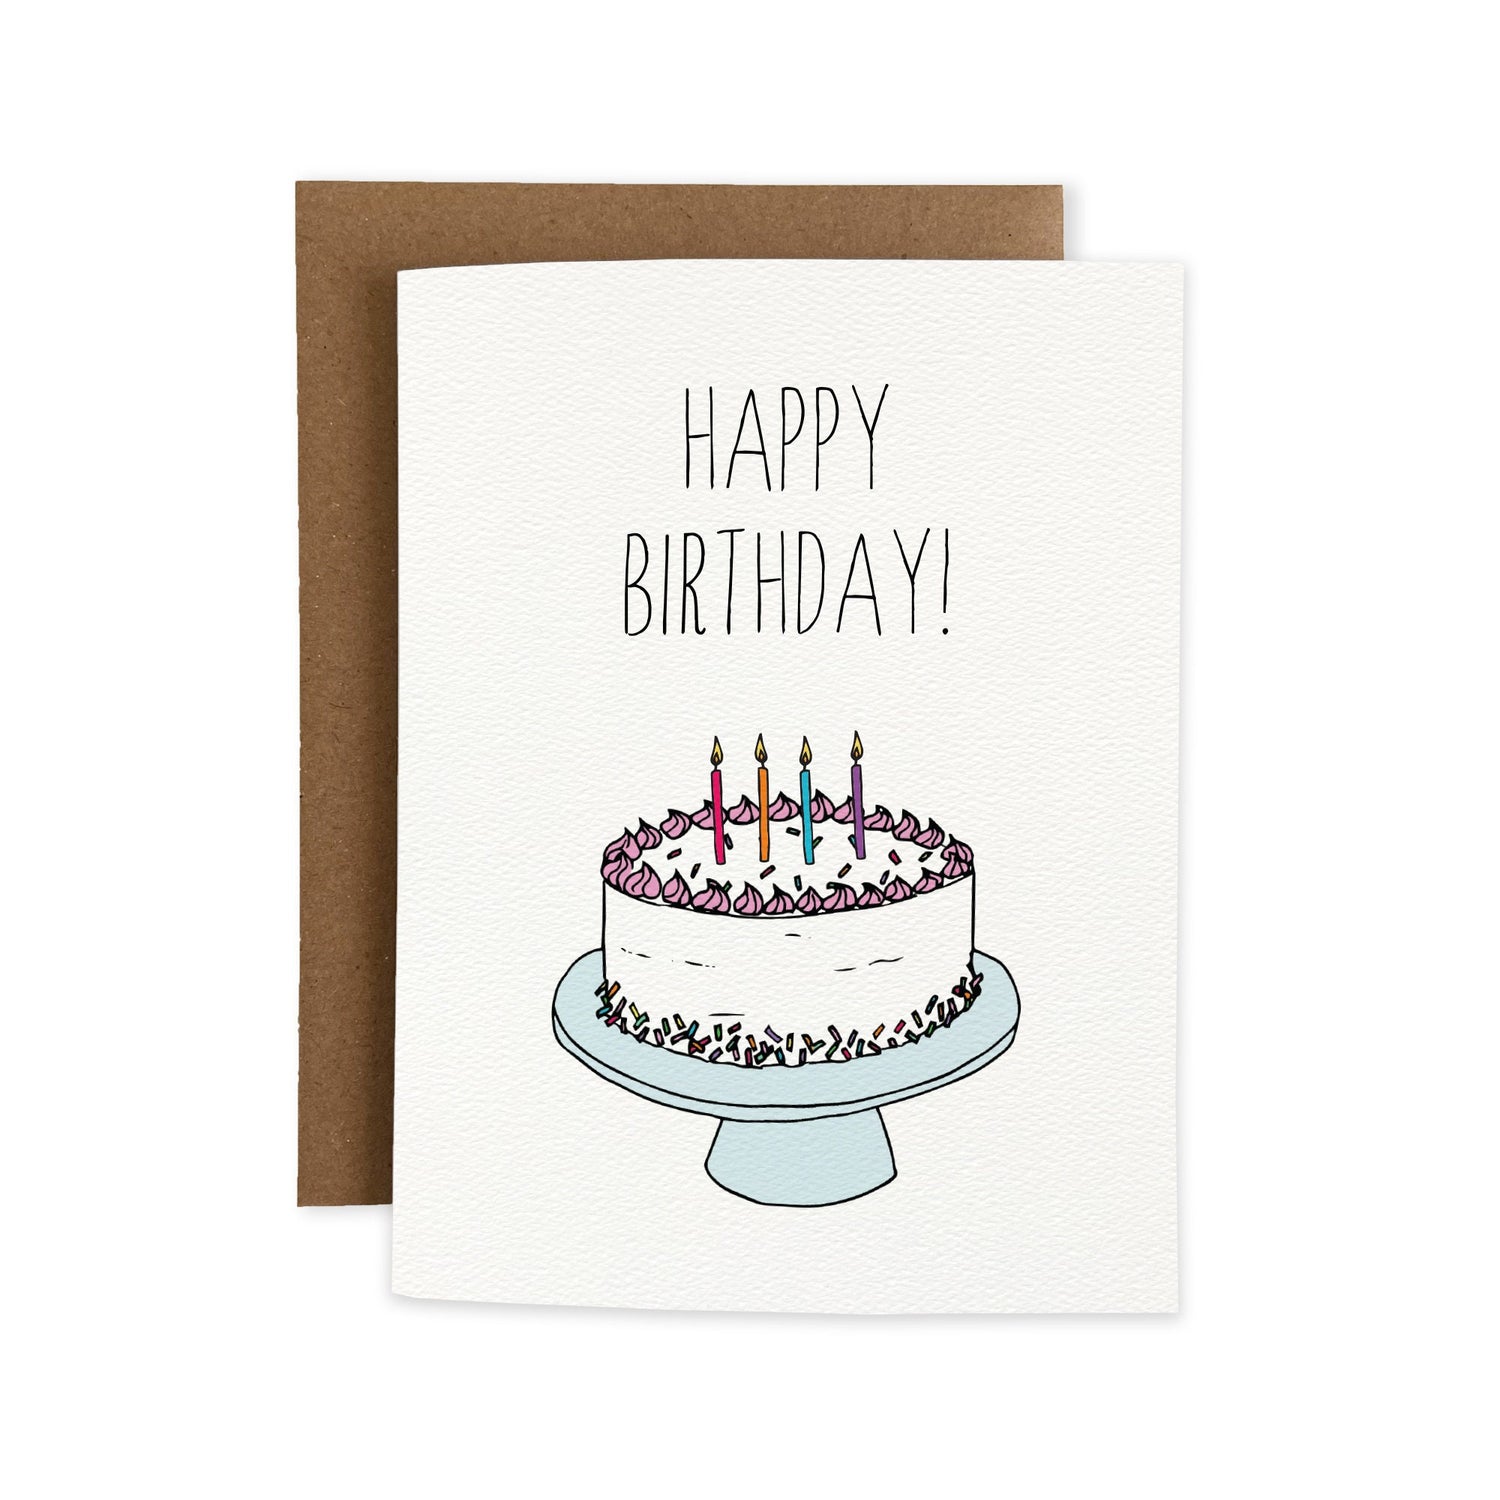 Birthday Cake Painting: Over 3,354 Royalty-Free Licensable Stock Vectors &  Vector Art | Shutterstock